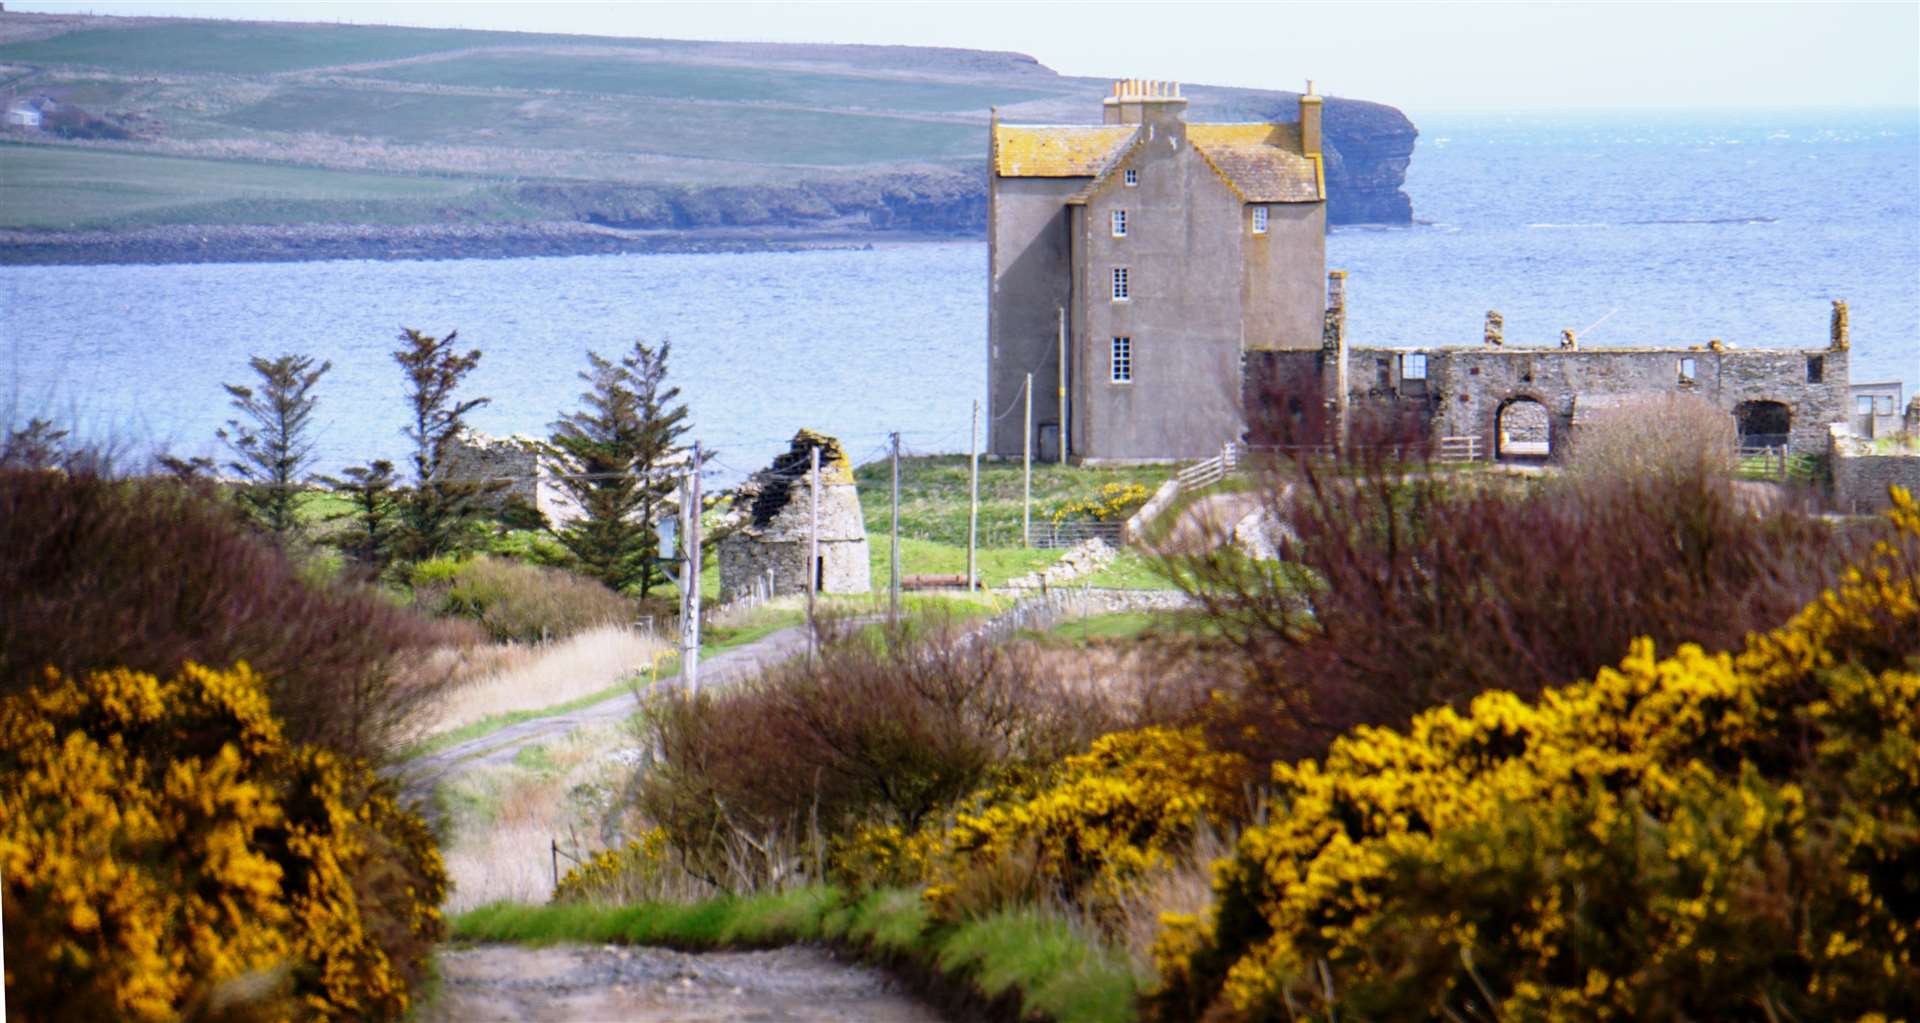 Freswick Castle where John Belushi stayed during his week-long holiday in Caithness.